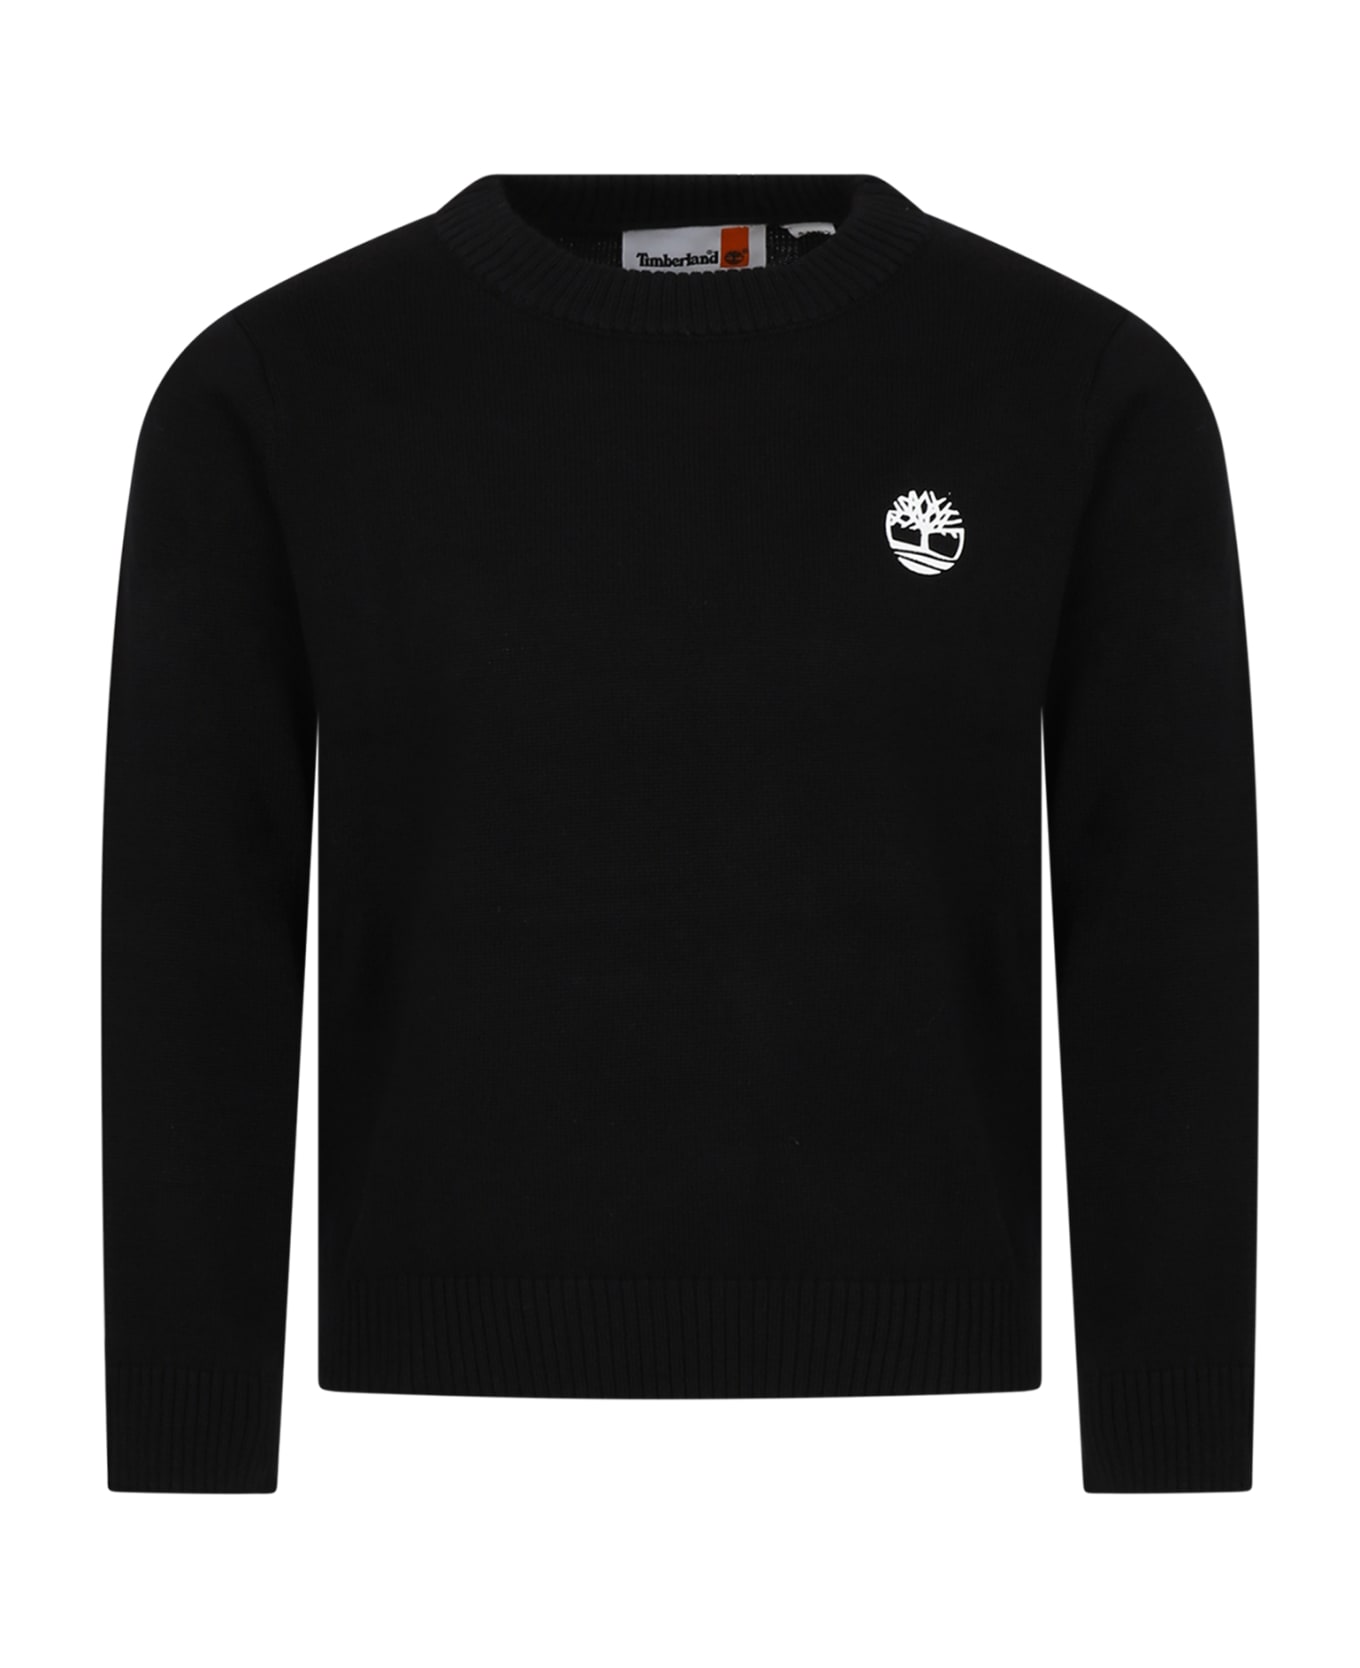 Timberland Black Sweater For Boy With Logo - Black